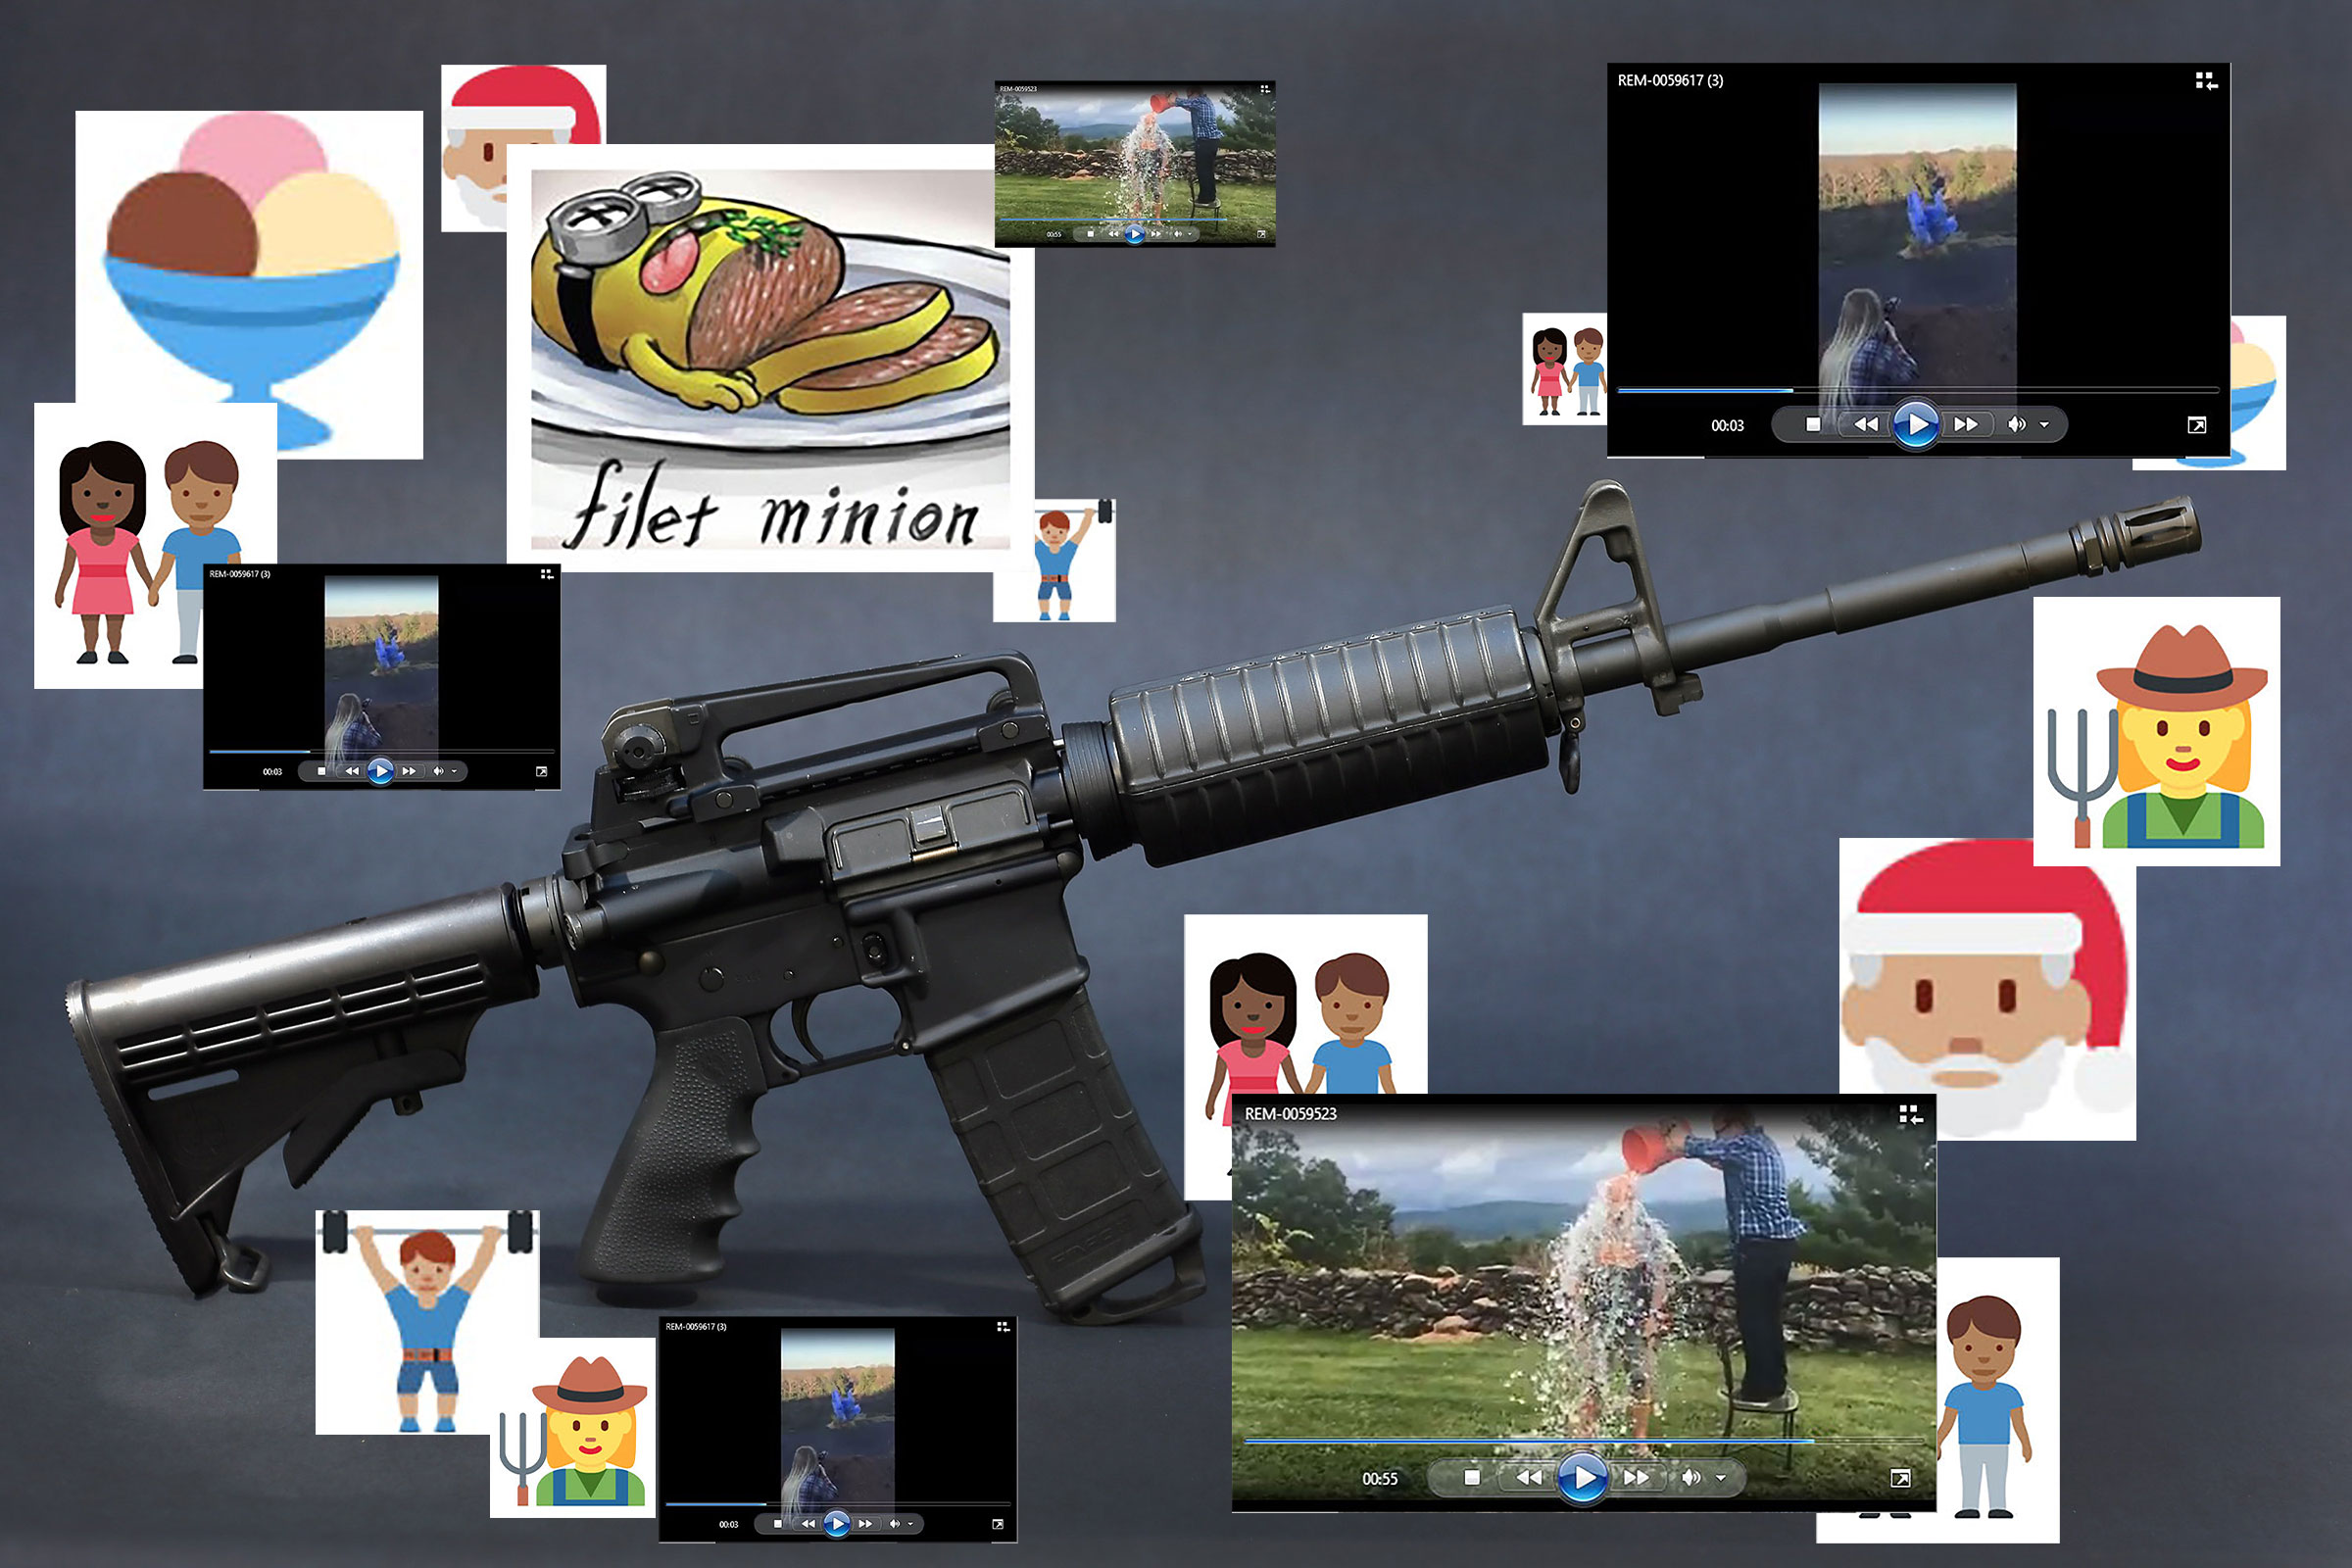 The Bushmaster AR-15 was used during a massacre at an elementary school in Newtown, Connecticut. (Photo Illustration by TIME/Getty Images/Connecticut Superior Court)